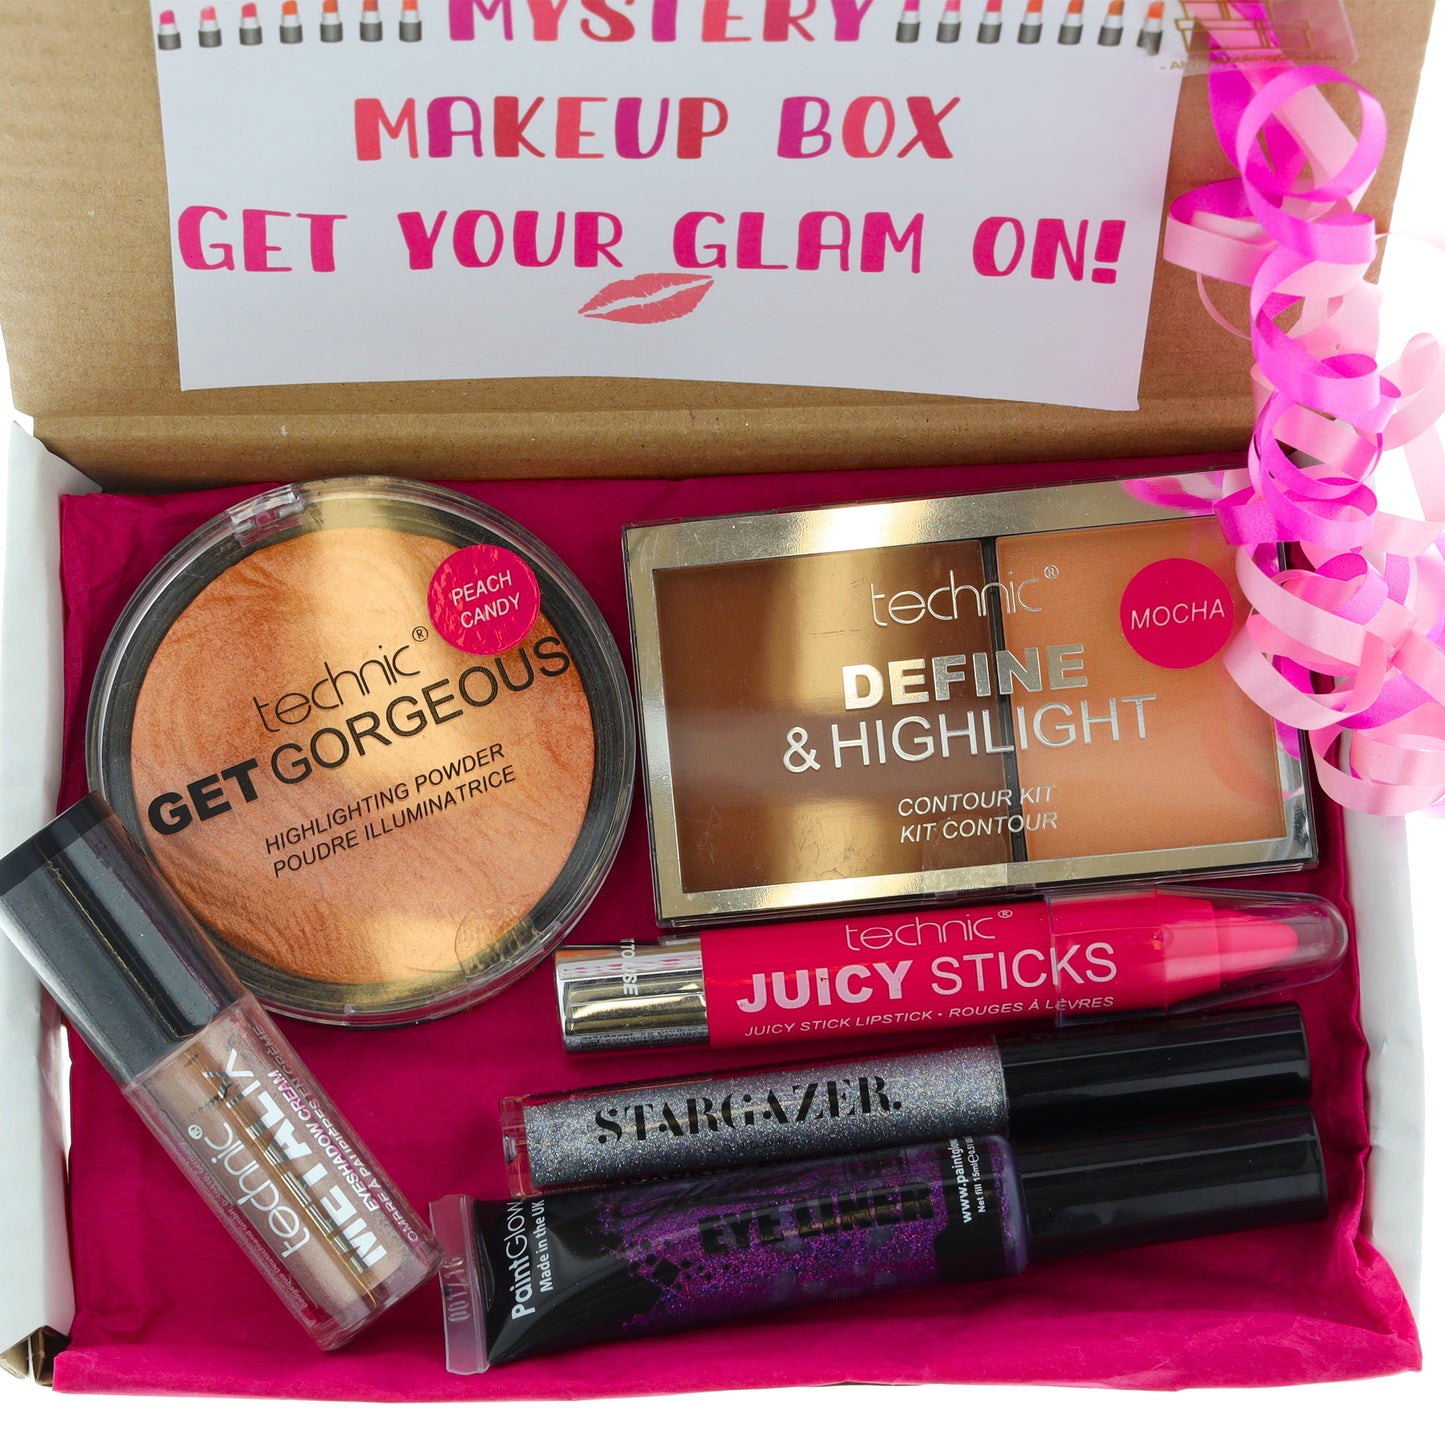 Mystery Lucky Dip Beauty Makeup Cosmetics Gift Box  - Always Looking Good -   